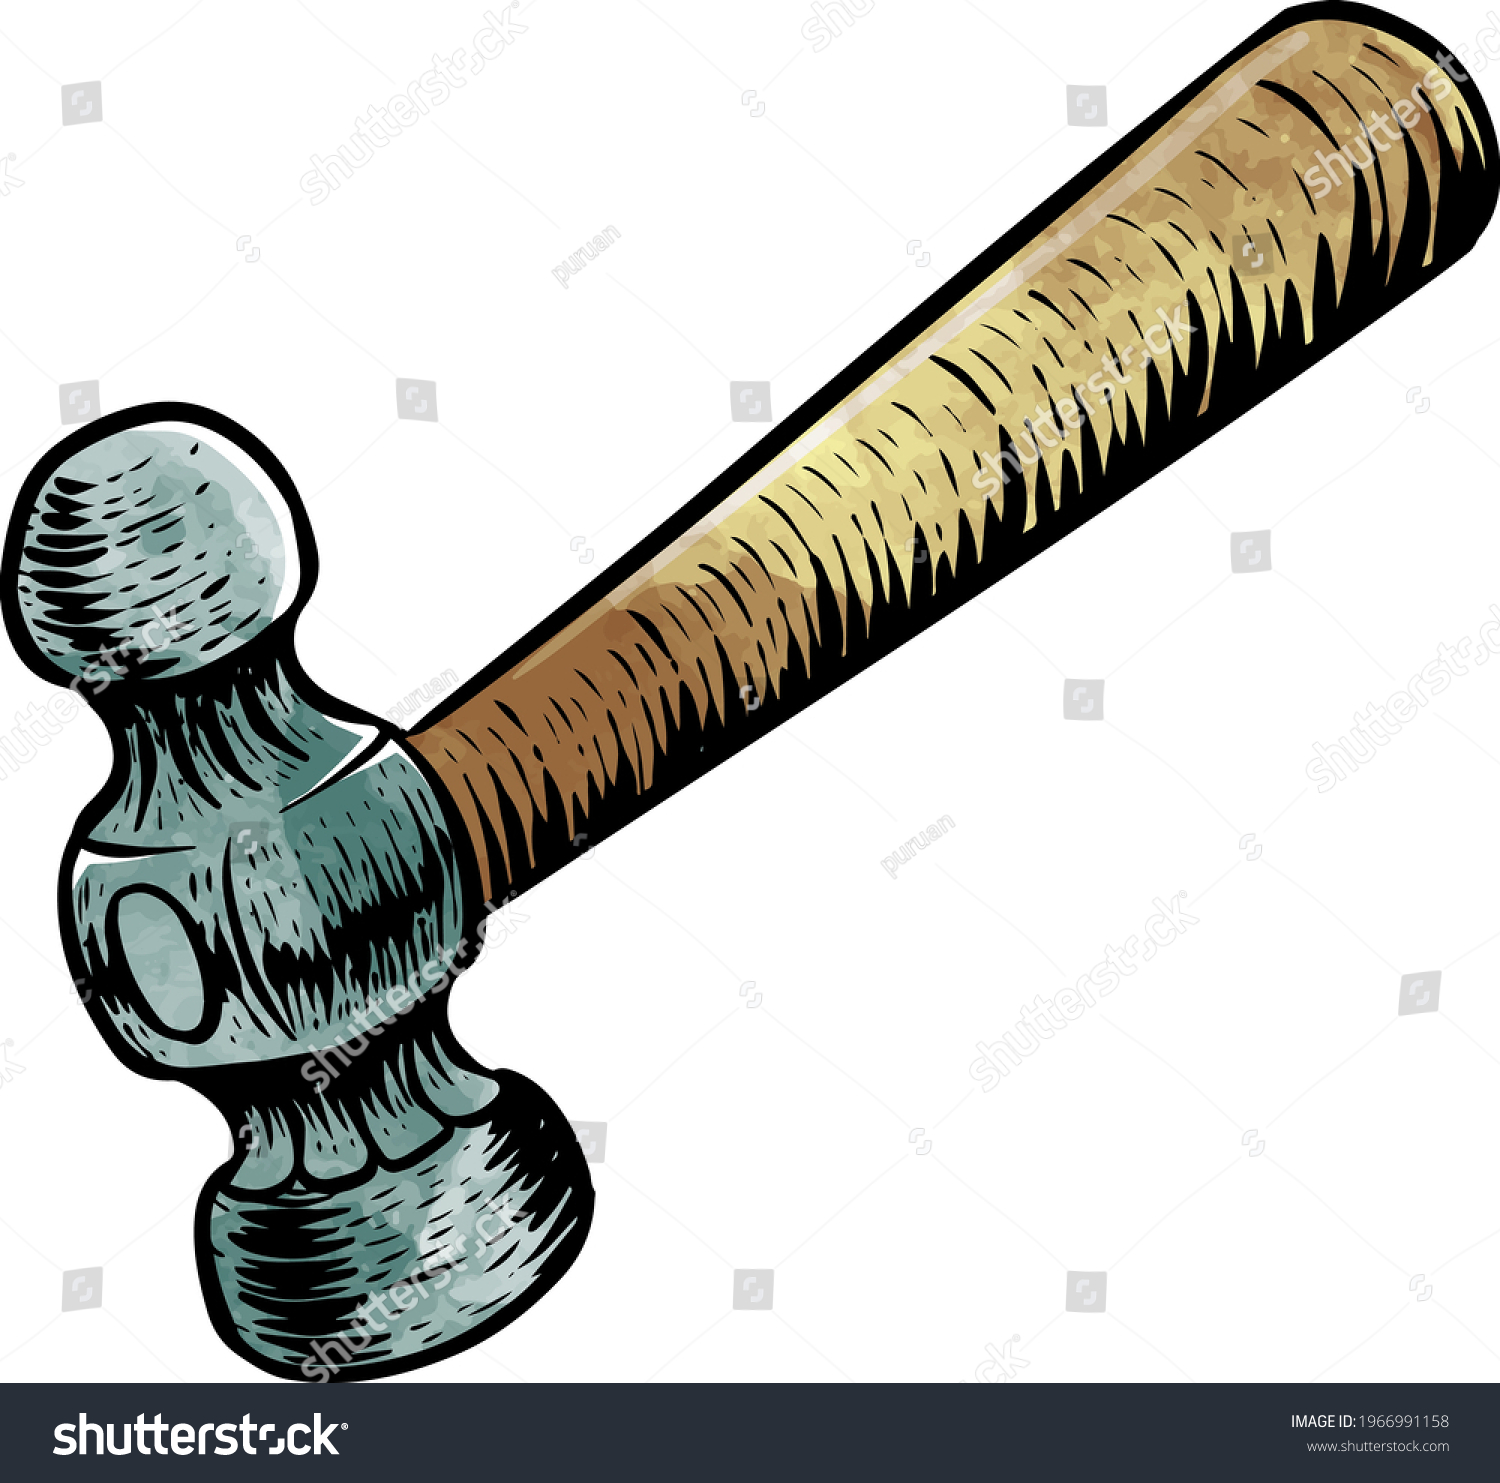 SVG of Watercolor style ball-peen hammer in woodcut drawing woodworking tool svg